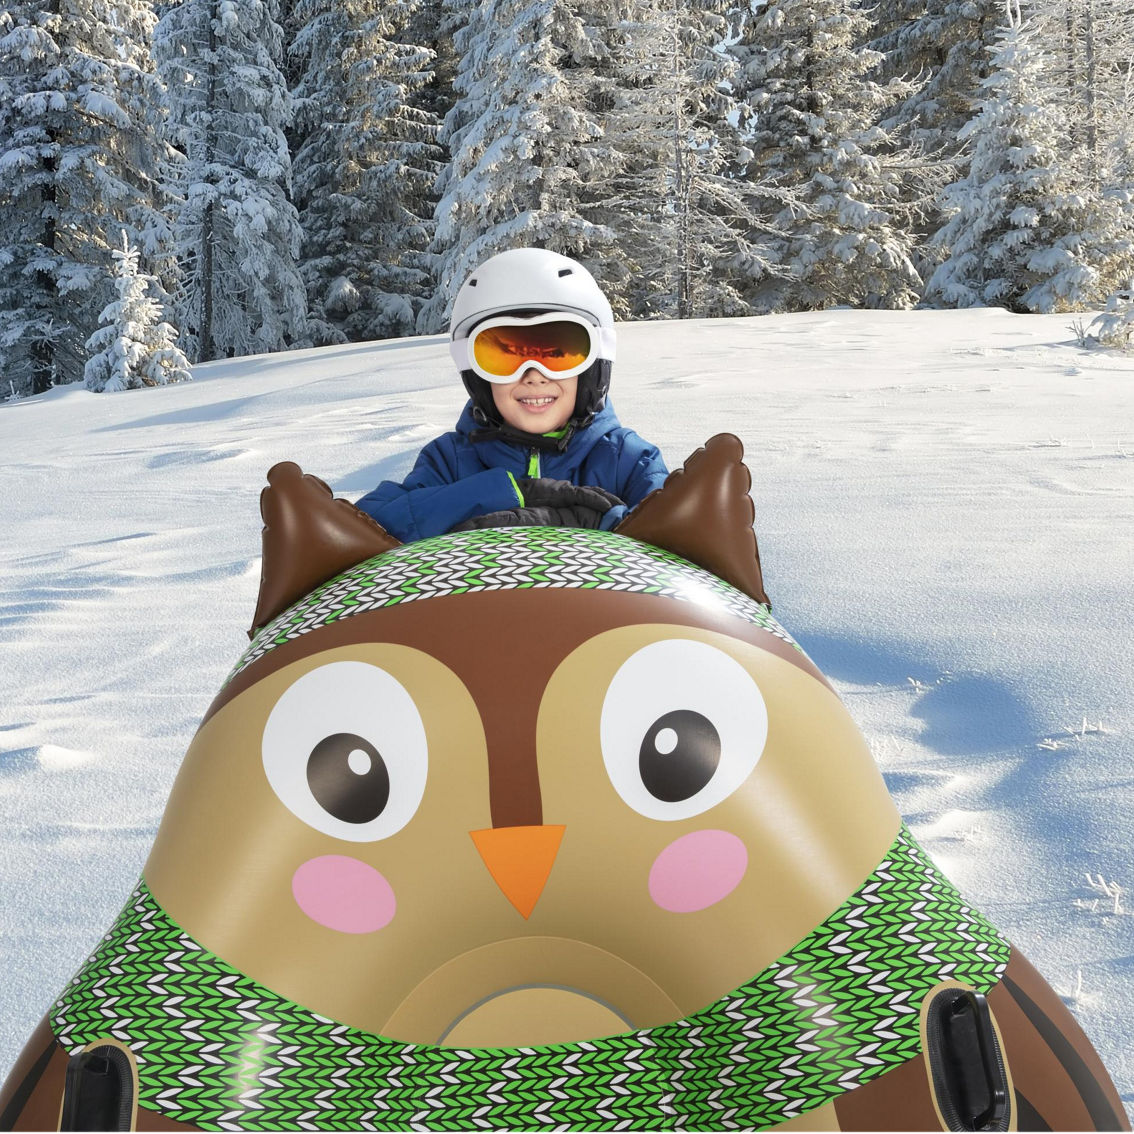 Bestway H2oGo Snow Oakley The Owl Snow Tube - Image 5 of 6